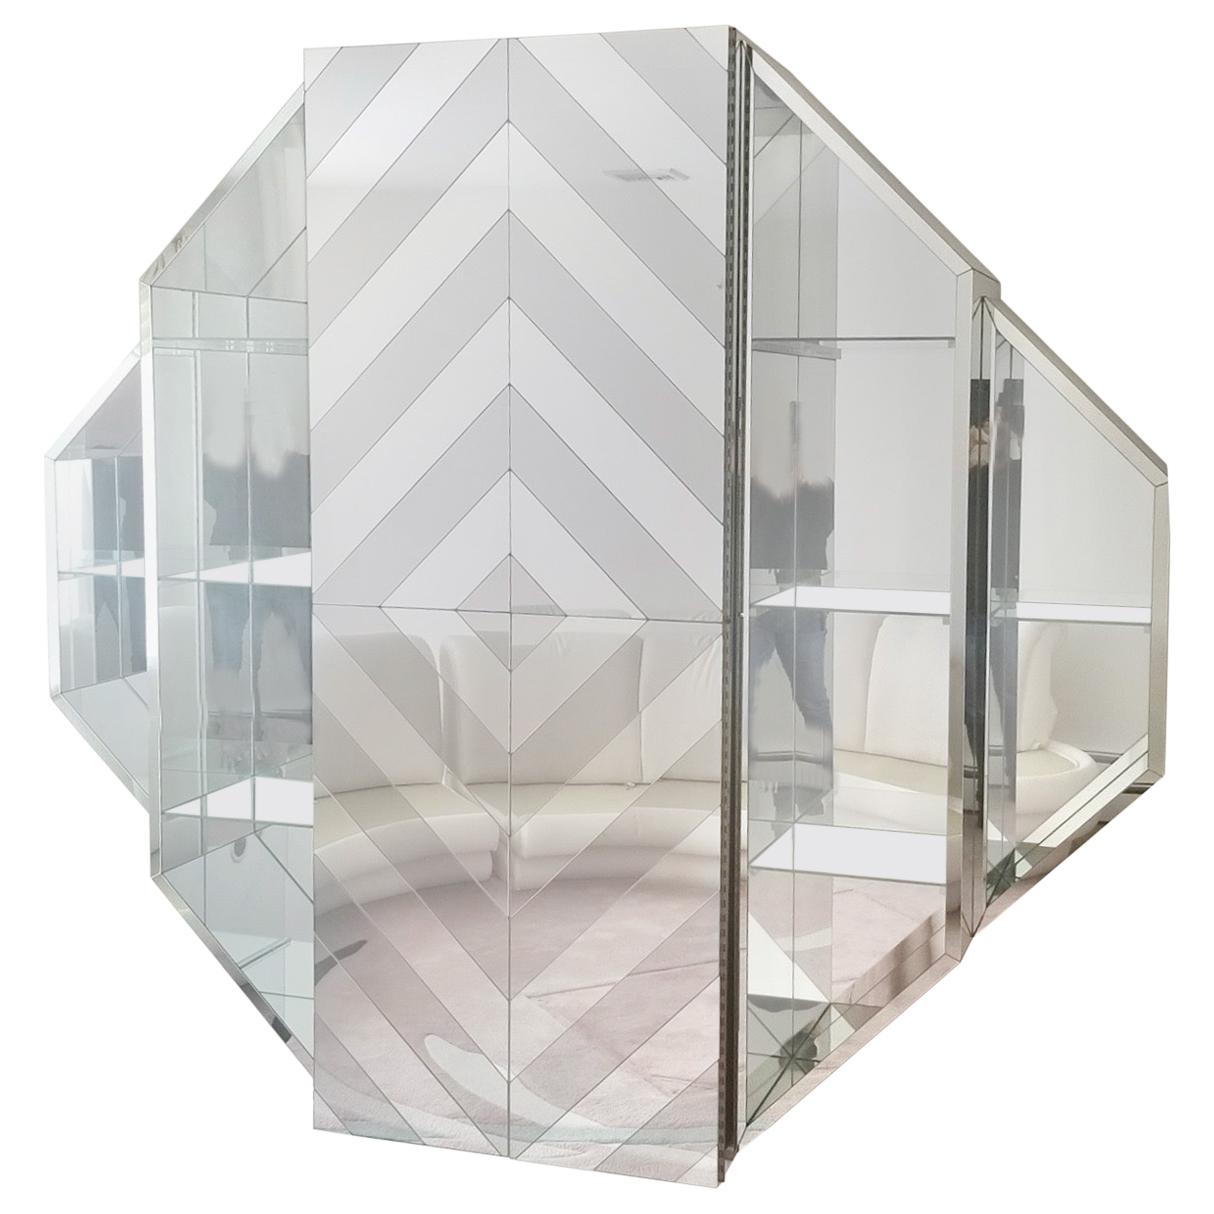 Mirrored Octagonal Wall-Mounted Bar Cabinet